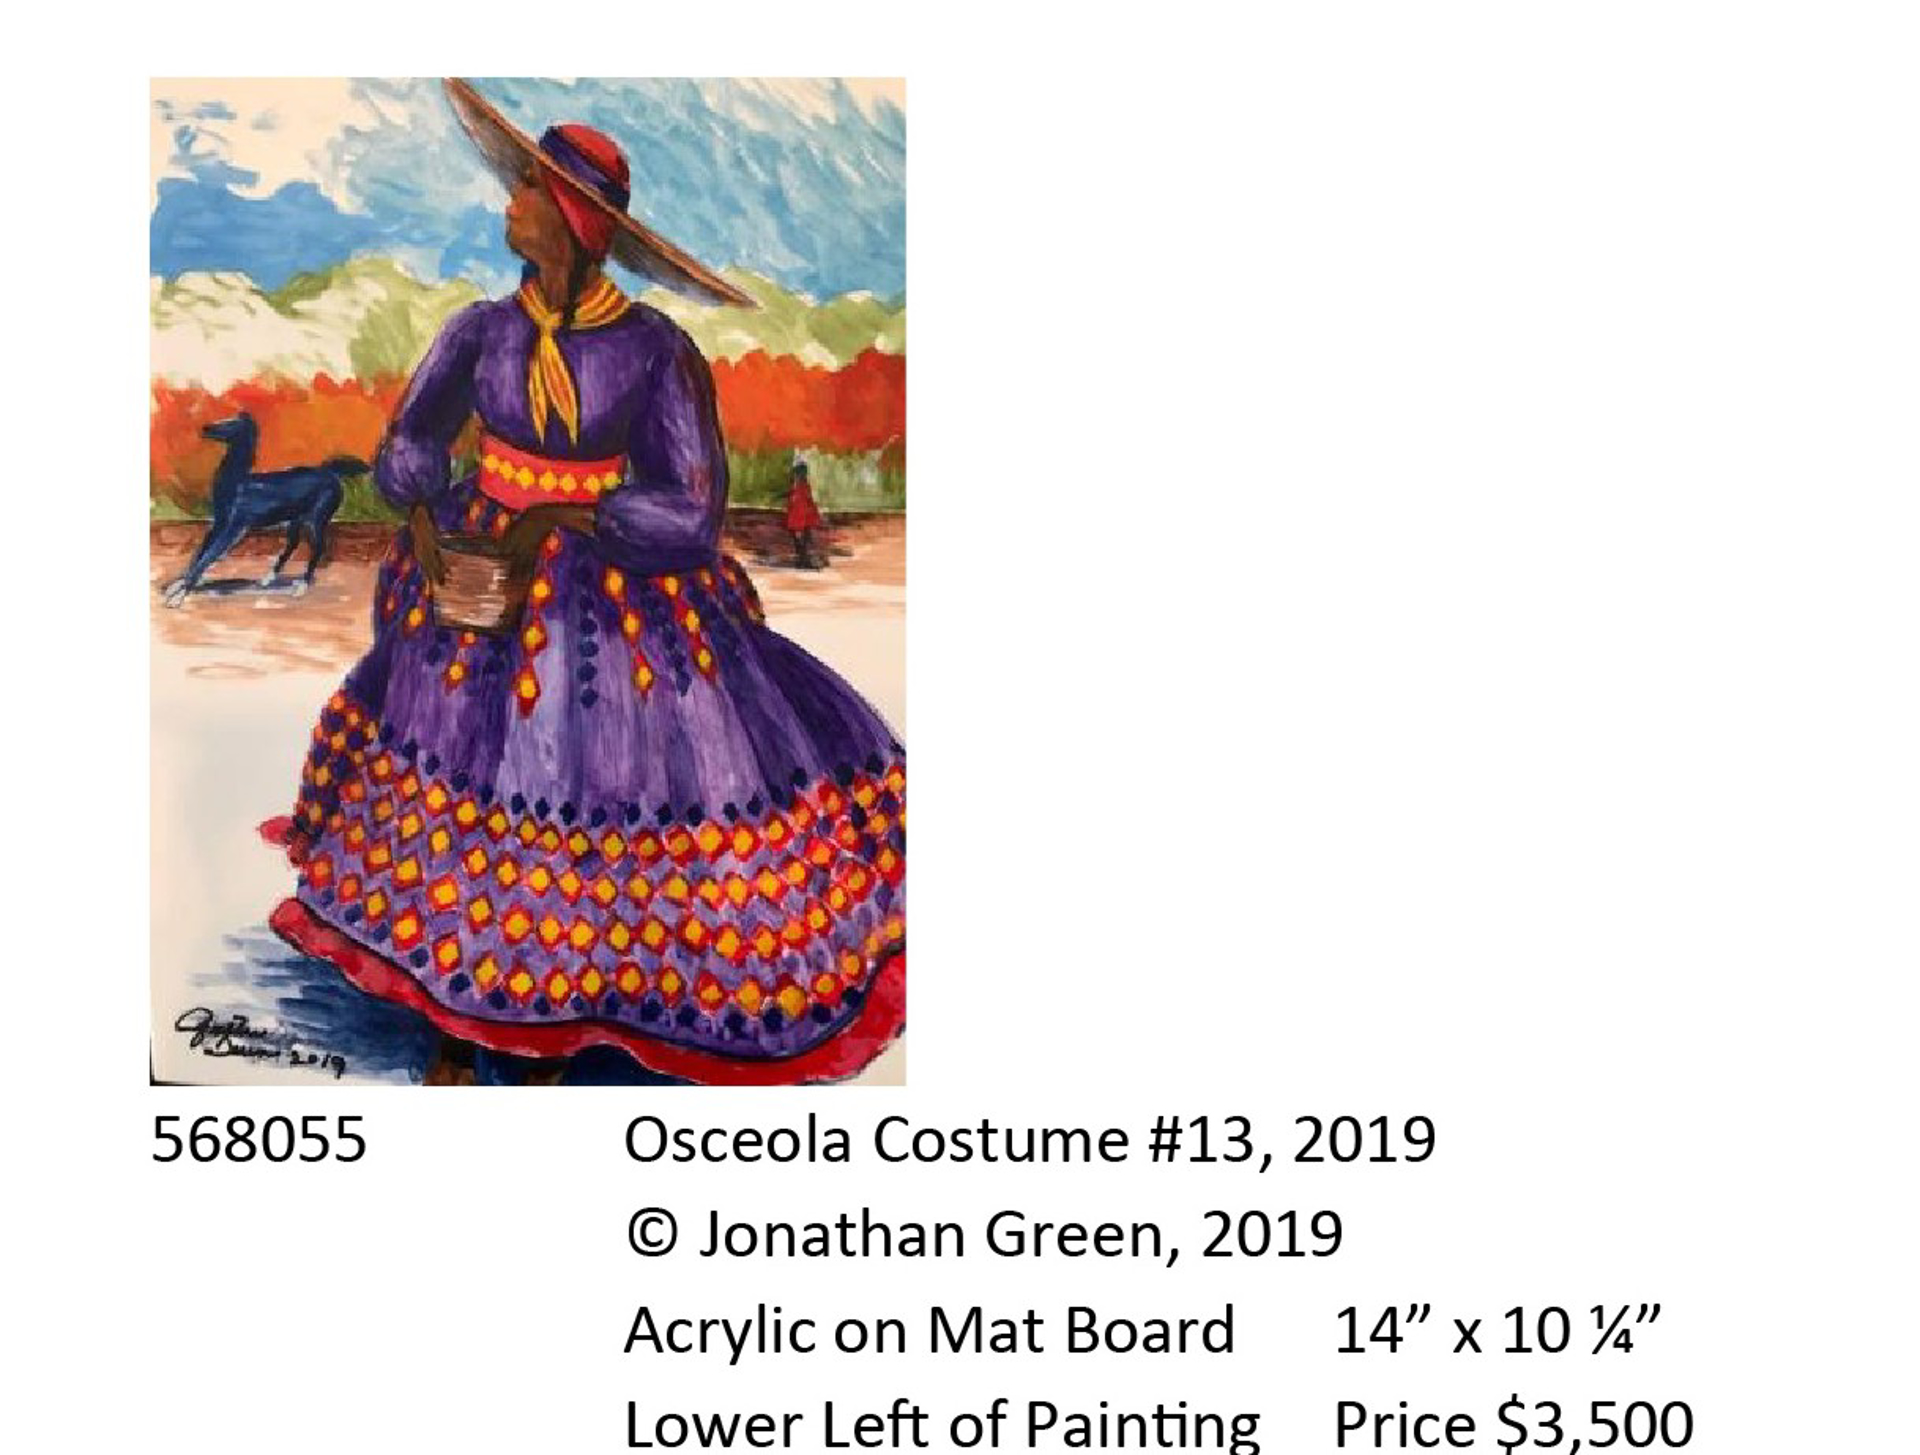 Osceola Costume #13 by Jonathan Green - Pop-Up Event